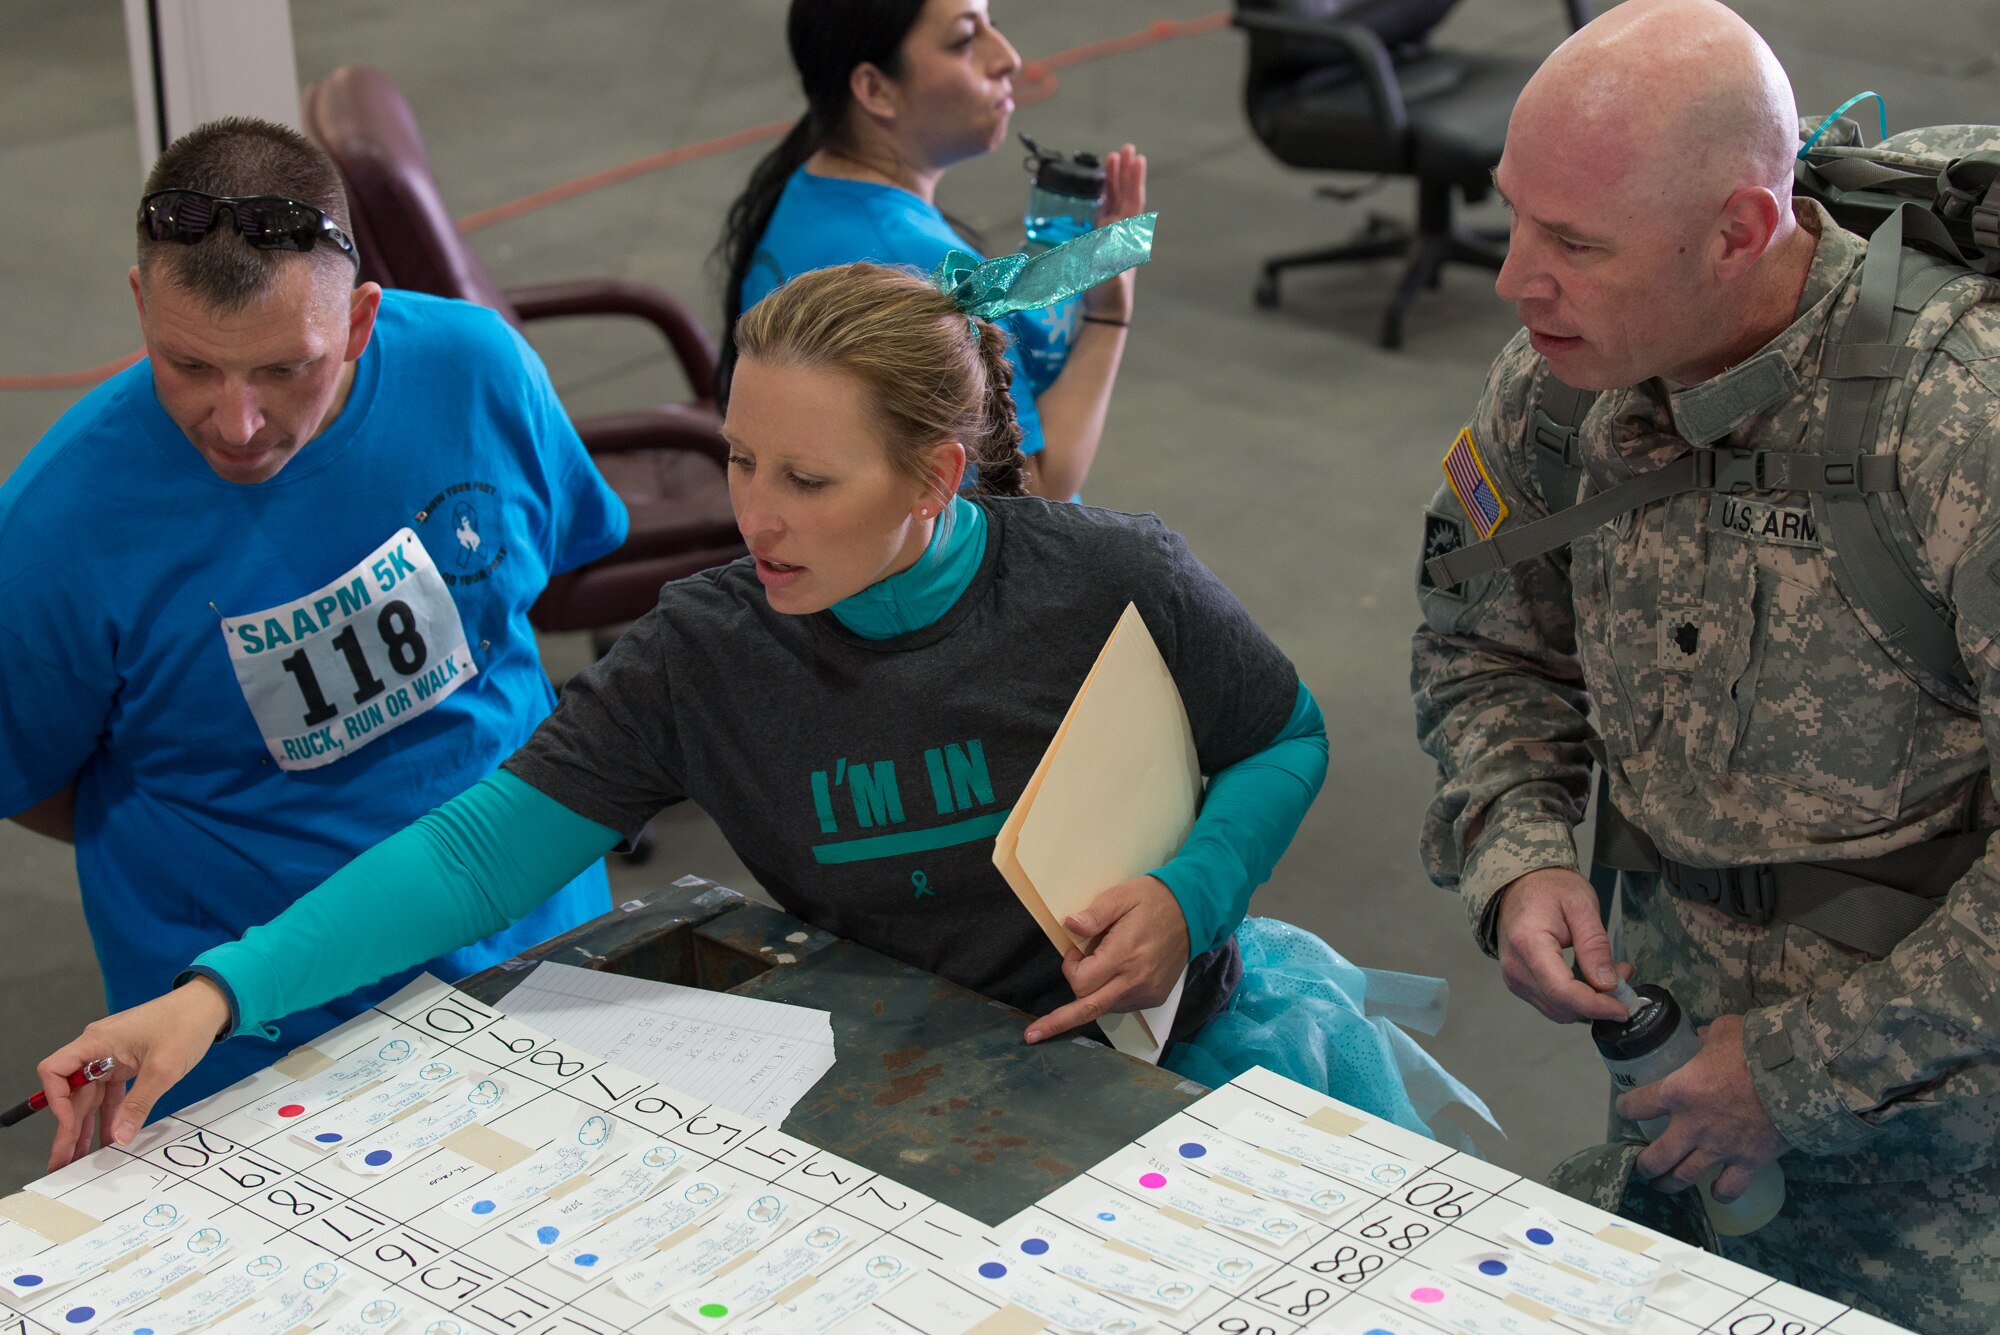 U.S. Air Force 1st Lt. Erin Swingholm, 153rd Airlift Wing Sexual Assault Prevention and Response Coordinator, Wyoming Air National Guard, reviews finishing times and placement of runners during a 5k ruck 5k run/walk, April 12, 2015, at Cheyenne Air National Guard Base in Cheyenne, Wyo. Swingholm organized a run to raise awareness for sexual assault awareness and prevention. (U.S. Air National Guard photo by Master Sgt. Charles Delano)